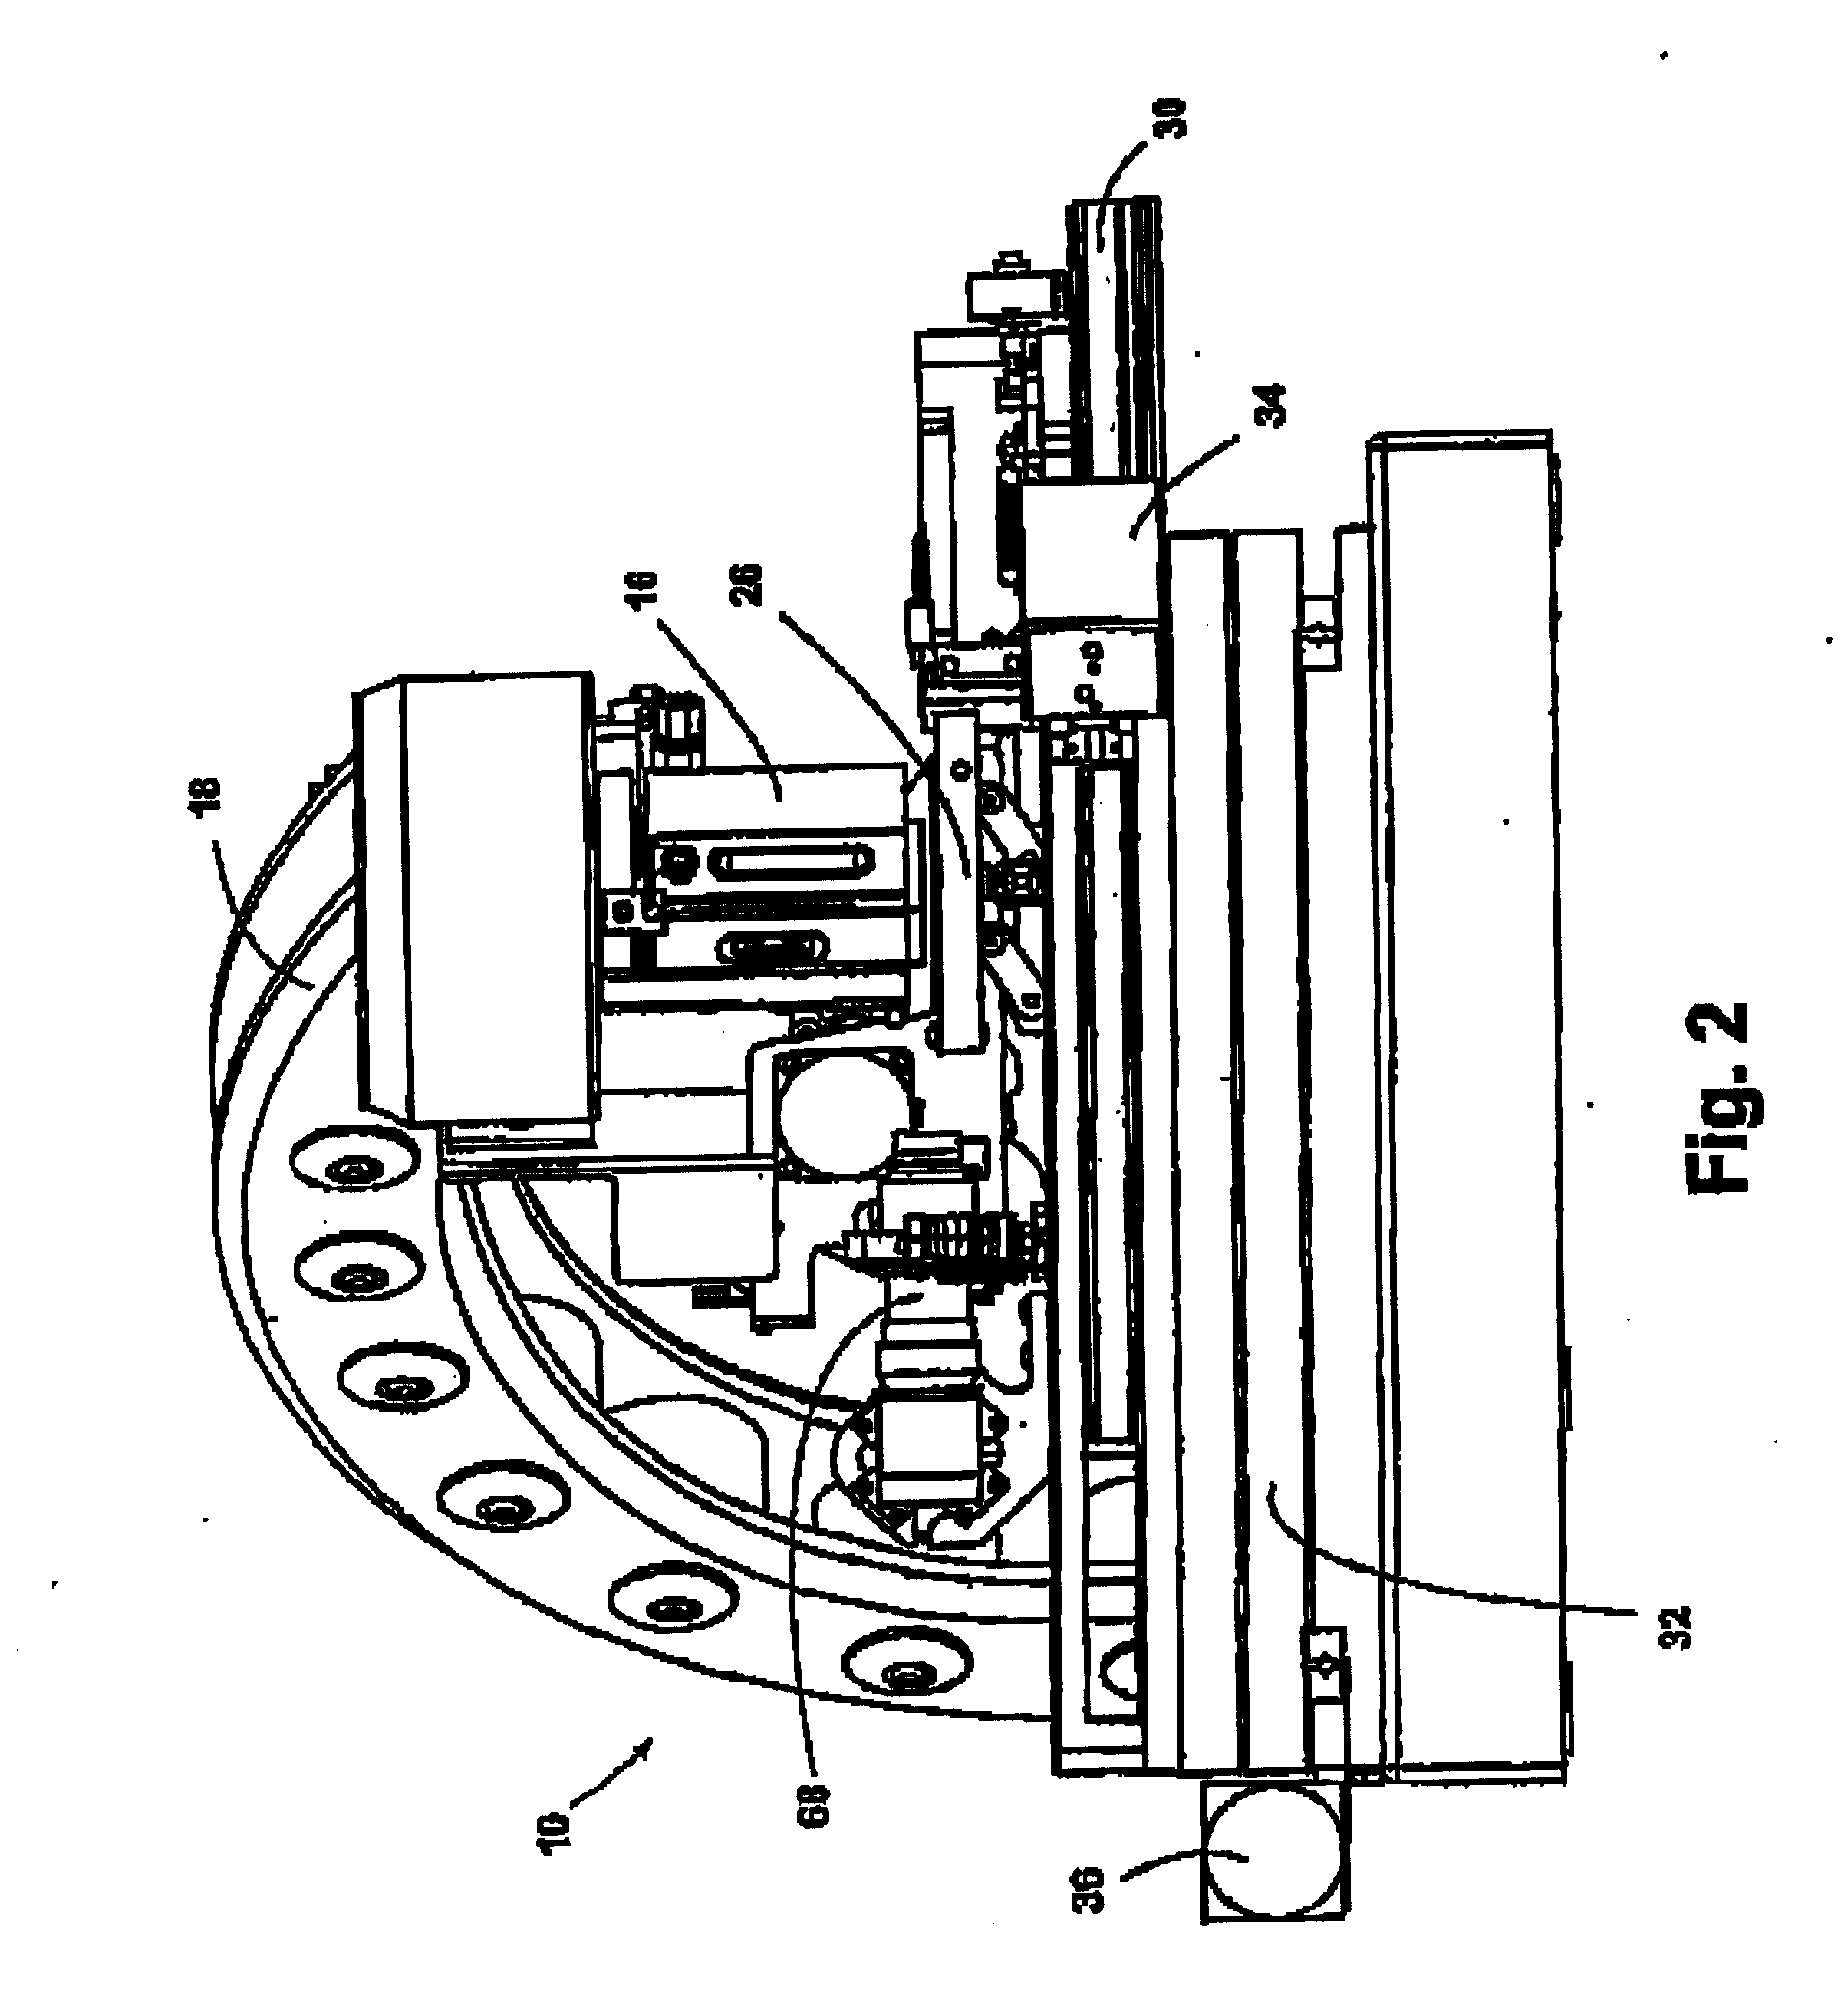 Interchangeable microdesition head apparatus and method